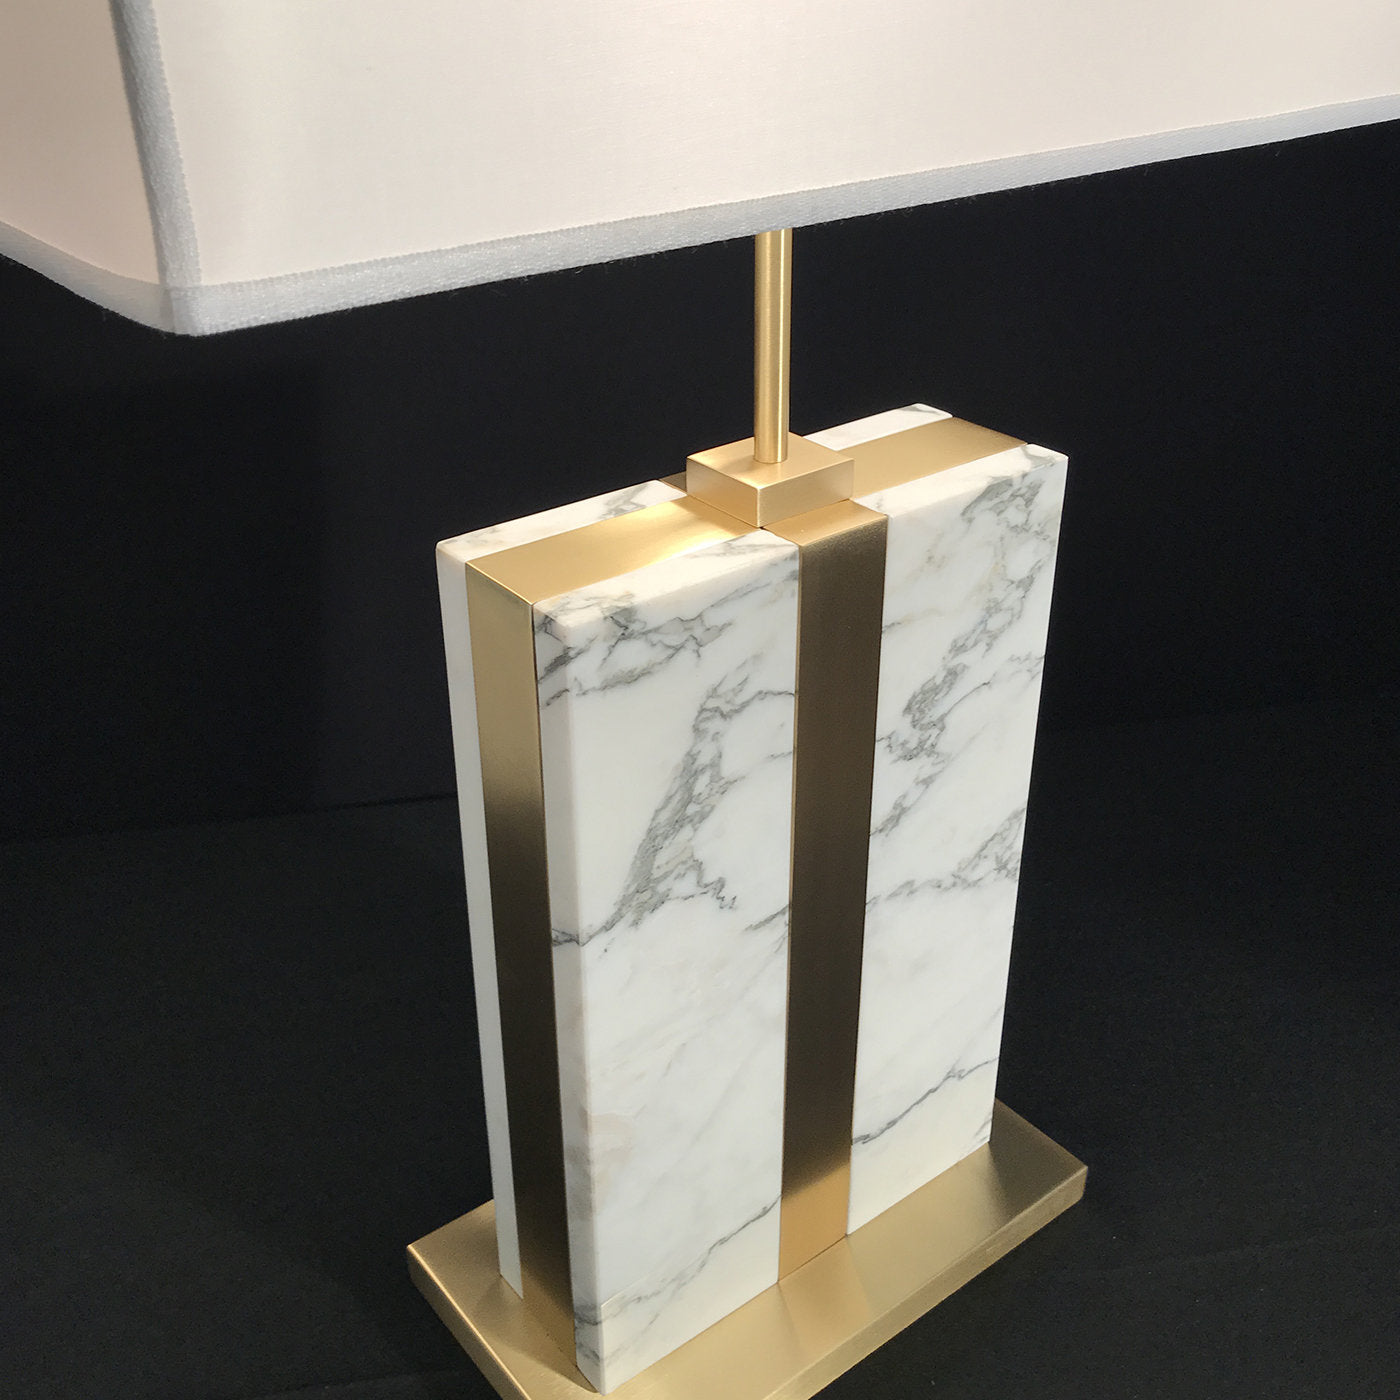 Brera Carrara Marble Table Lamp with Ivory Parchment Shade - Alternative view 1